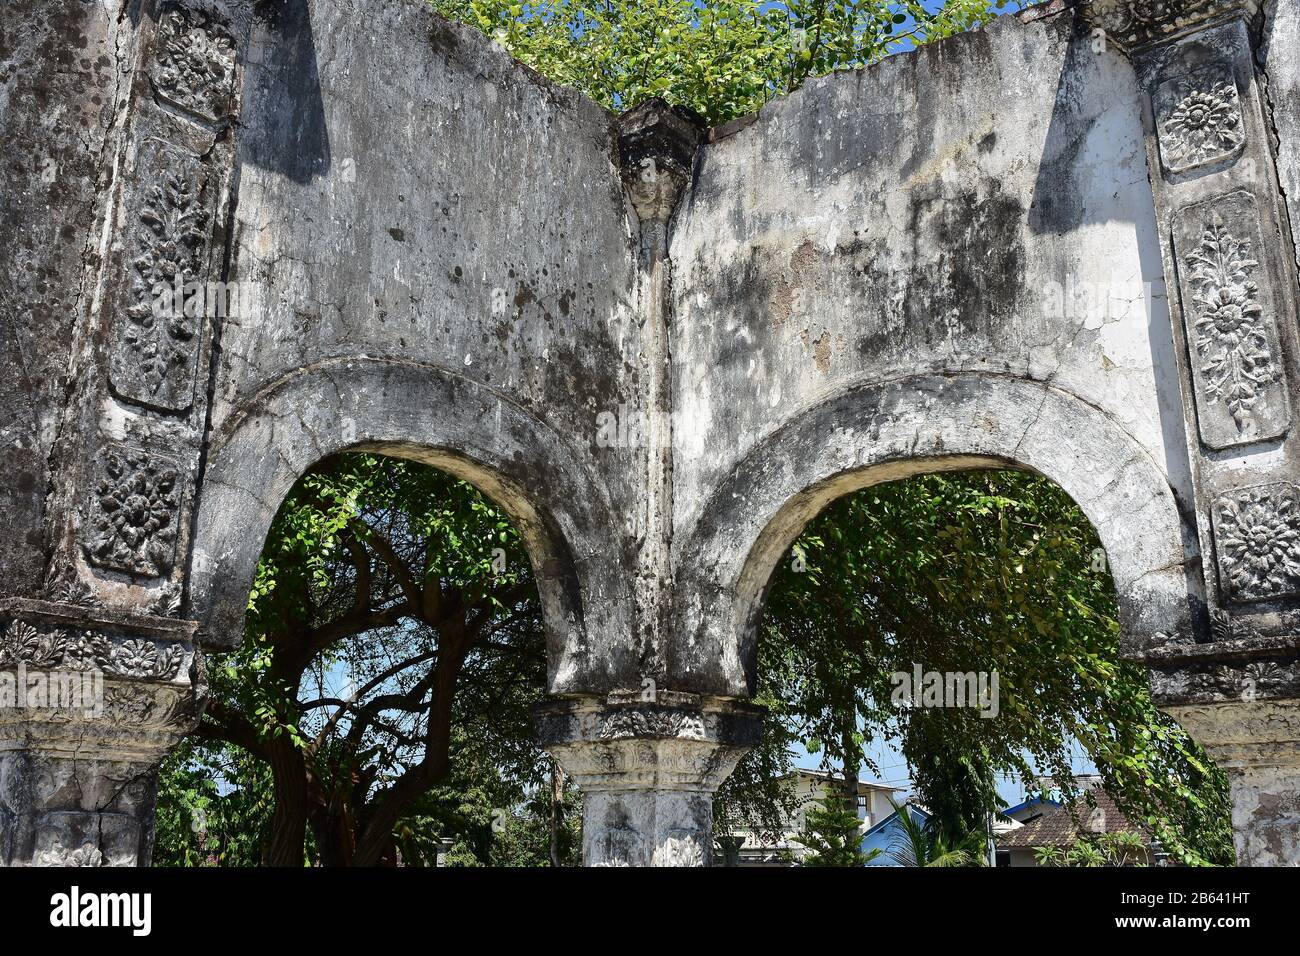 Preserved stone ruin of building on premises of Ujung Water Palace in Bali. Stock Photo